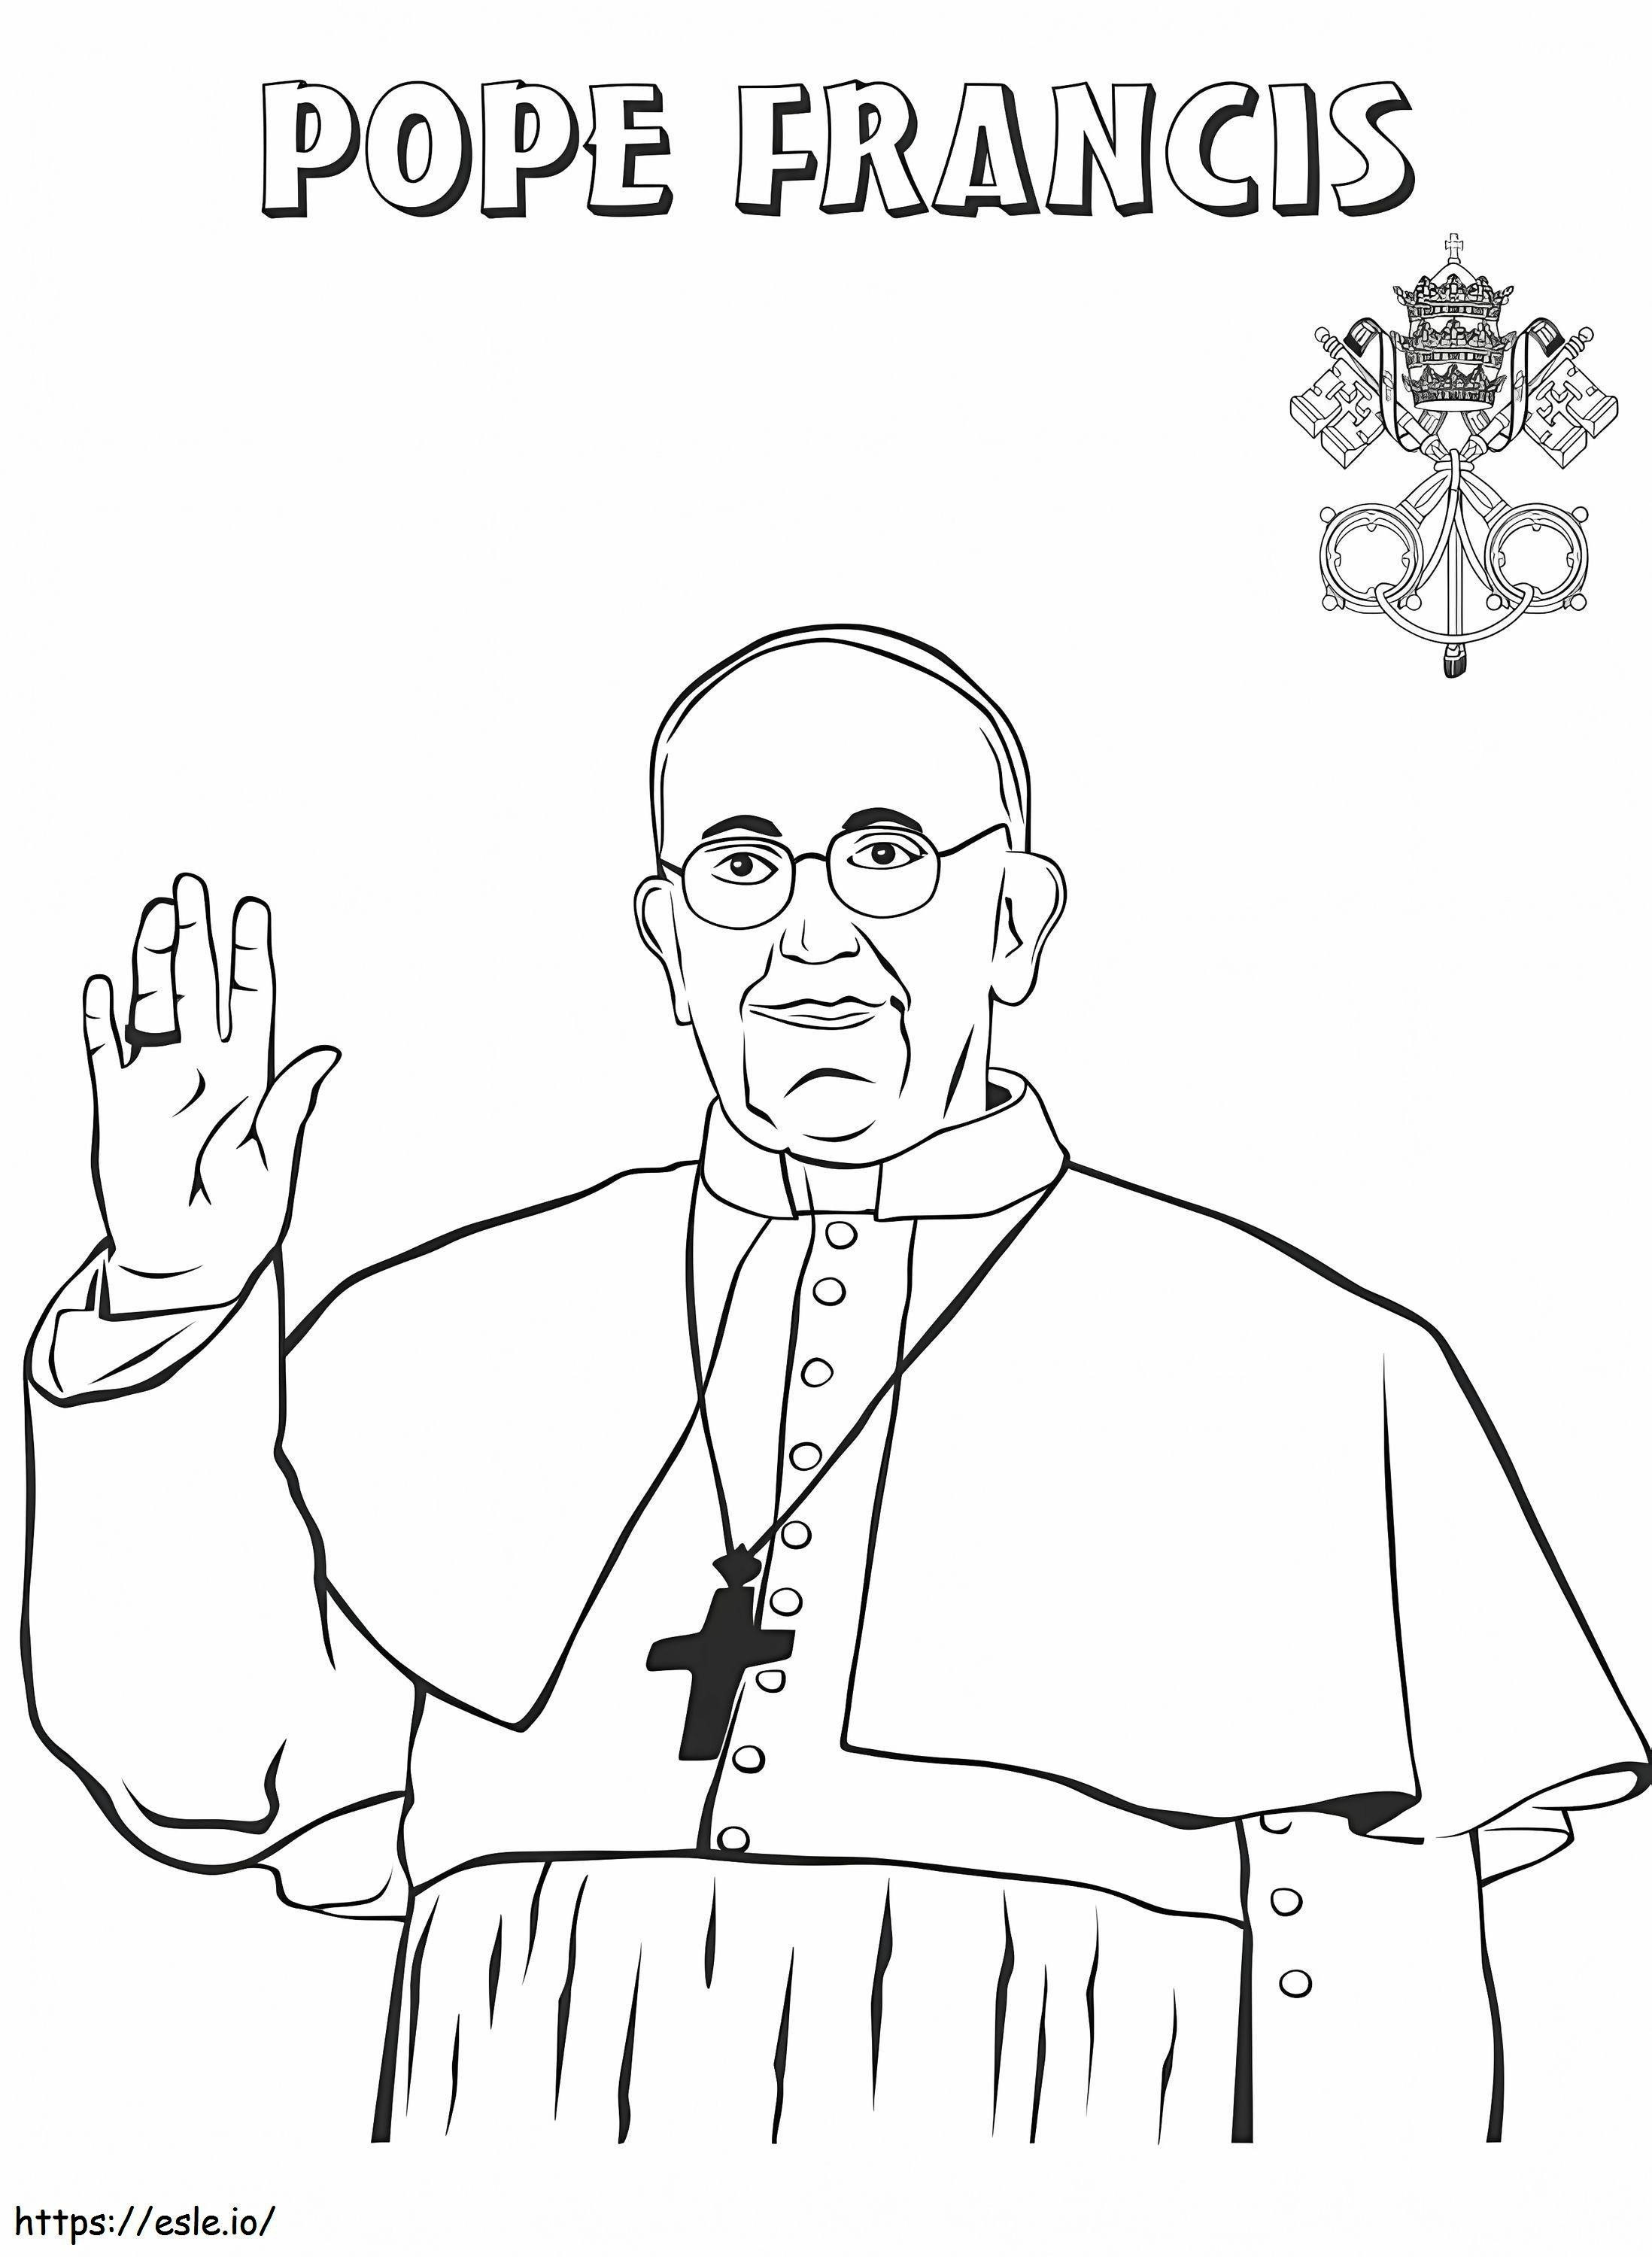 Pope Francis coloring page